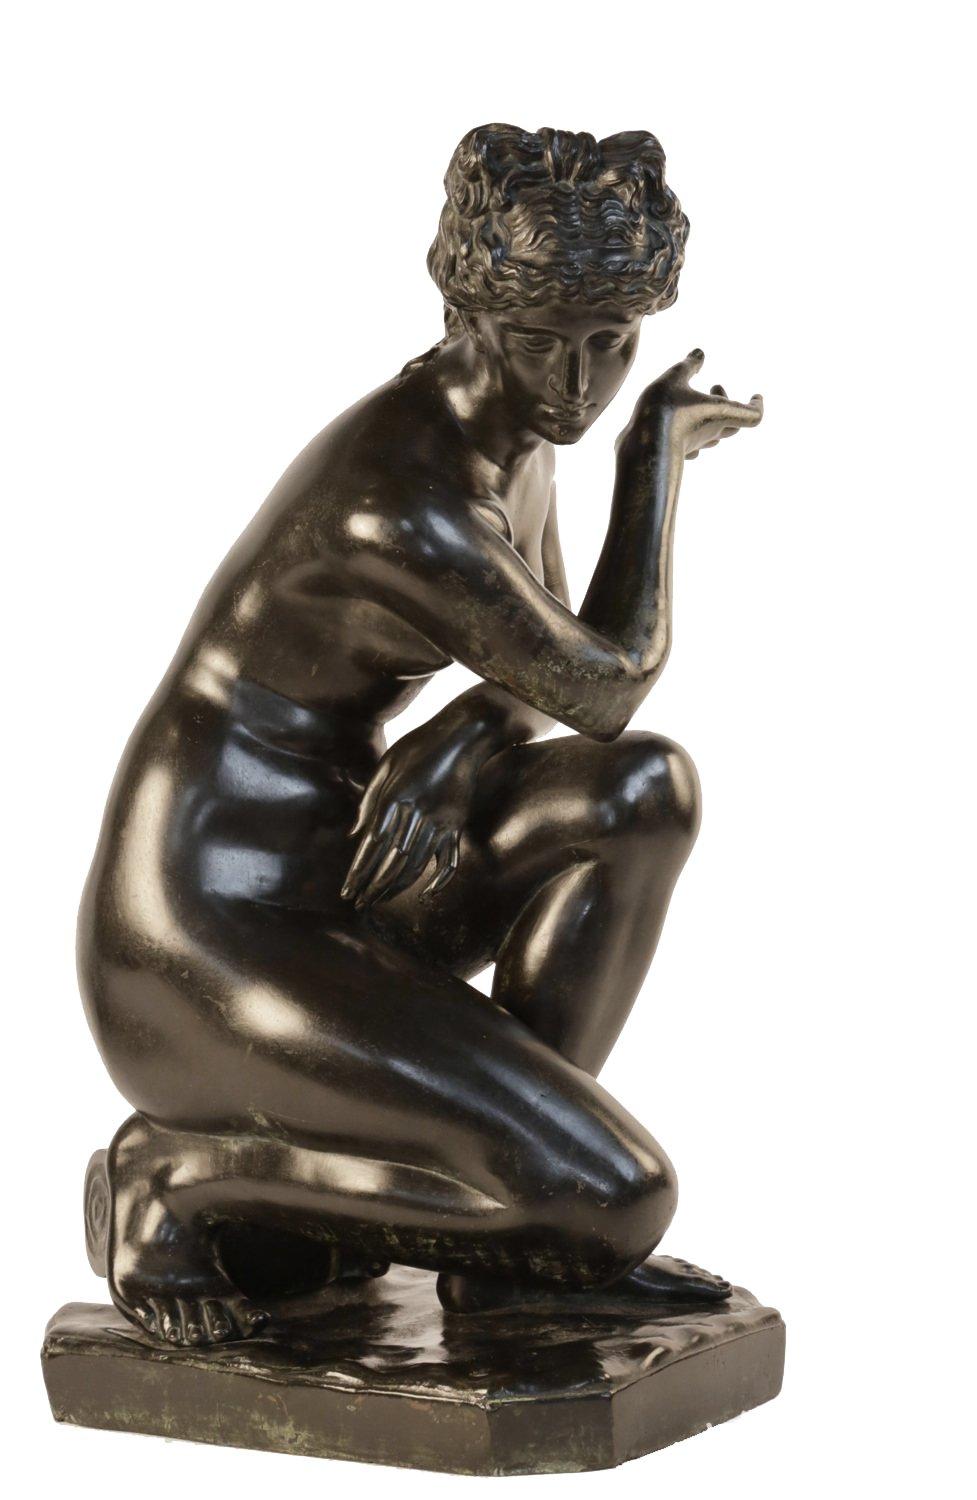 Unknown Nude Sculpture - 19th Century Bronze Figure of Crouching Venus or Naked Aphrodite